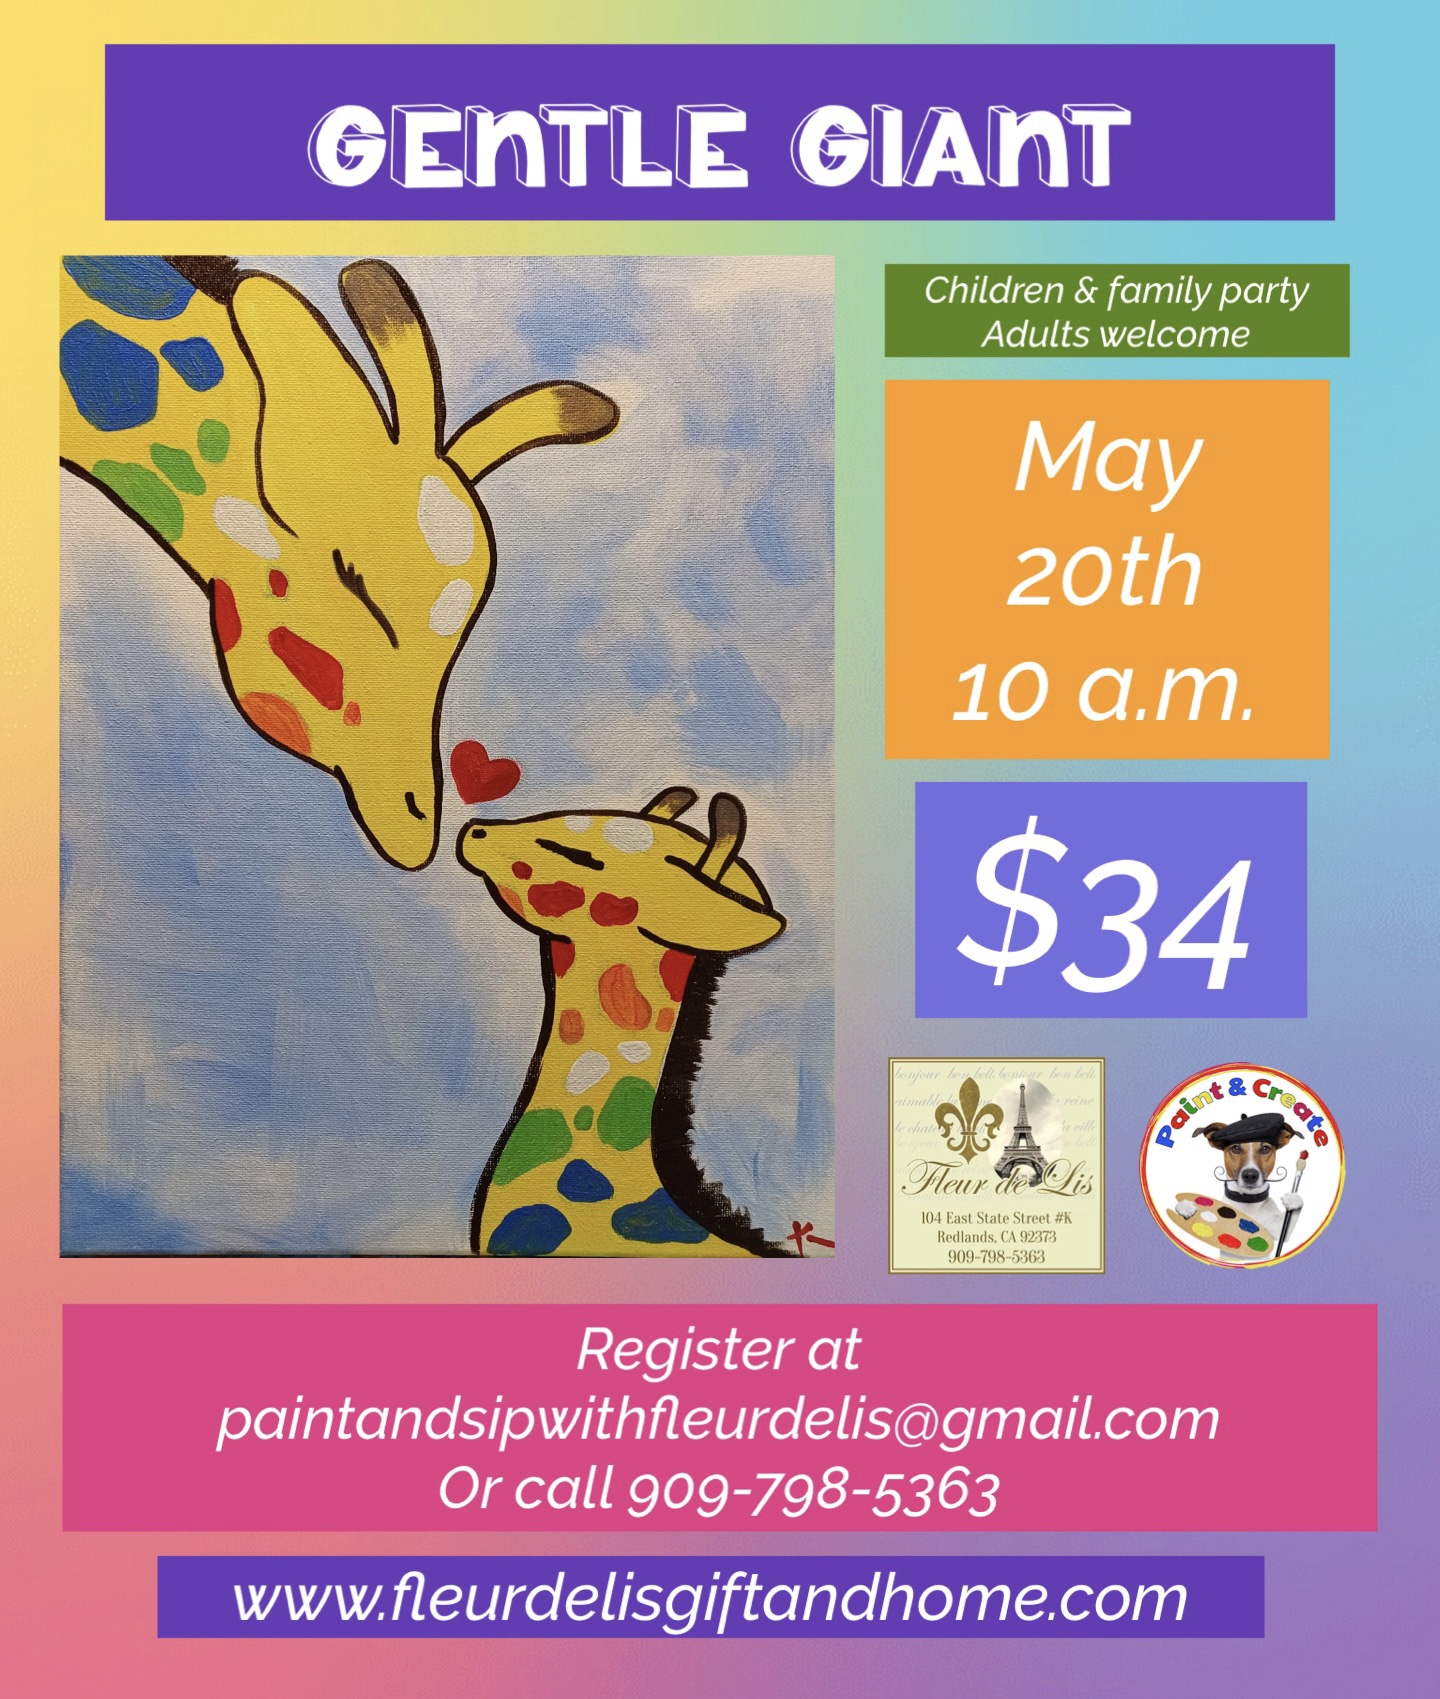 Gentle Giant May 20th 10 a.m.